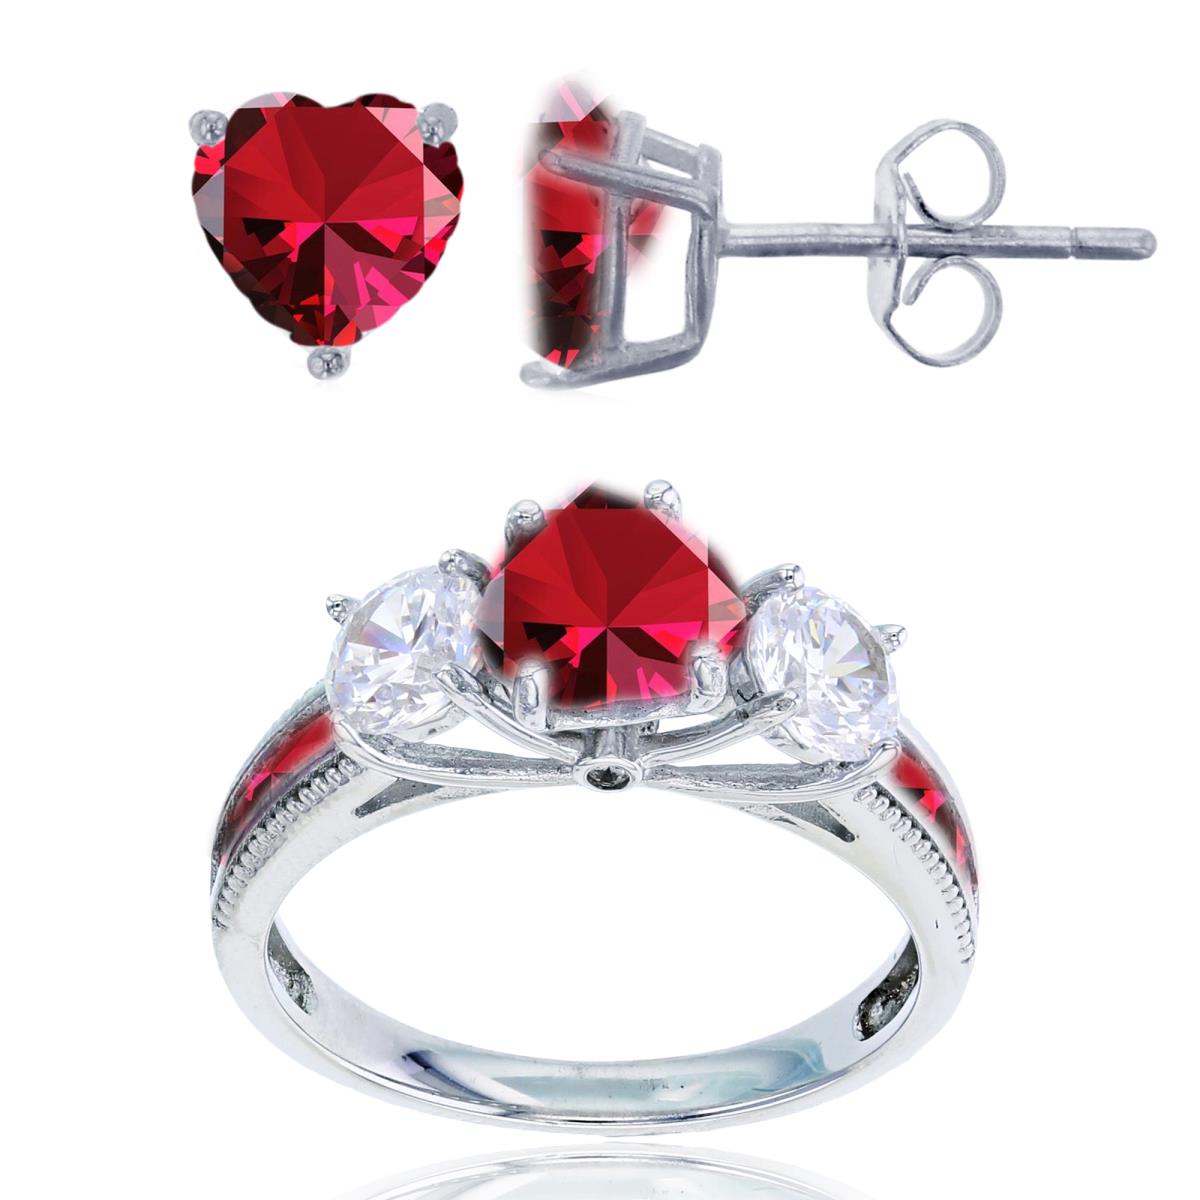 Sterling Silver Rhodium 3-Stone 7mm #8 Ruby Hrt & 5mm Rd CZ Ring & 6mm Hrt Solitaire Stud Earring Set